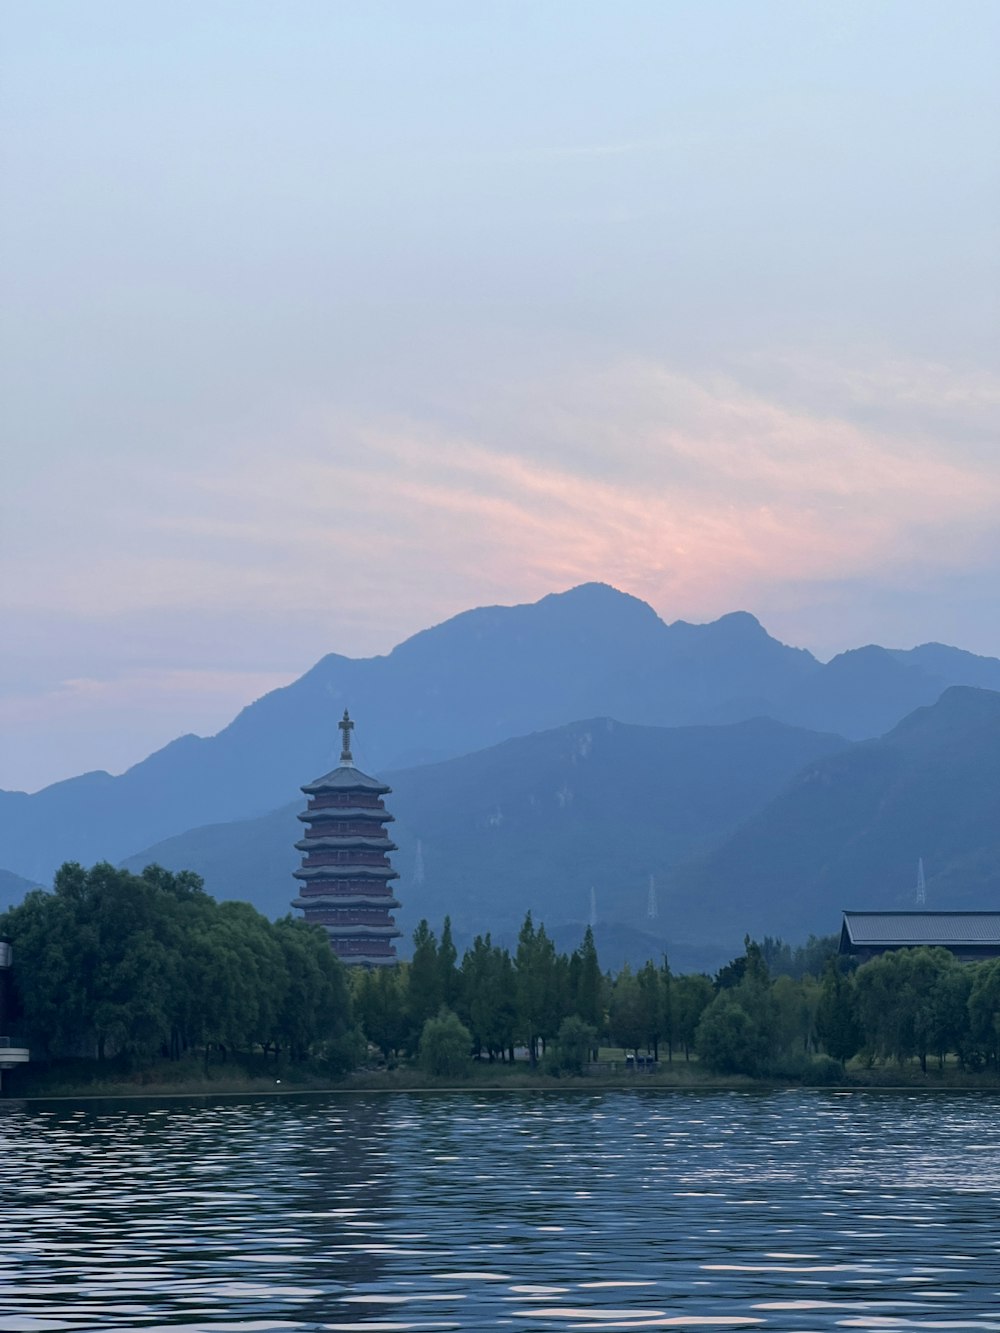 a building next to a body of water with trees and mountains in the background